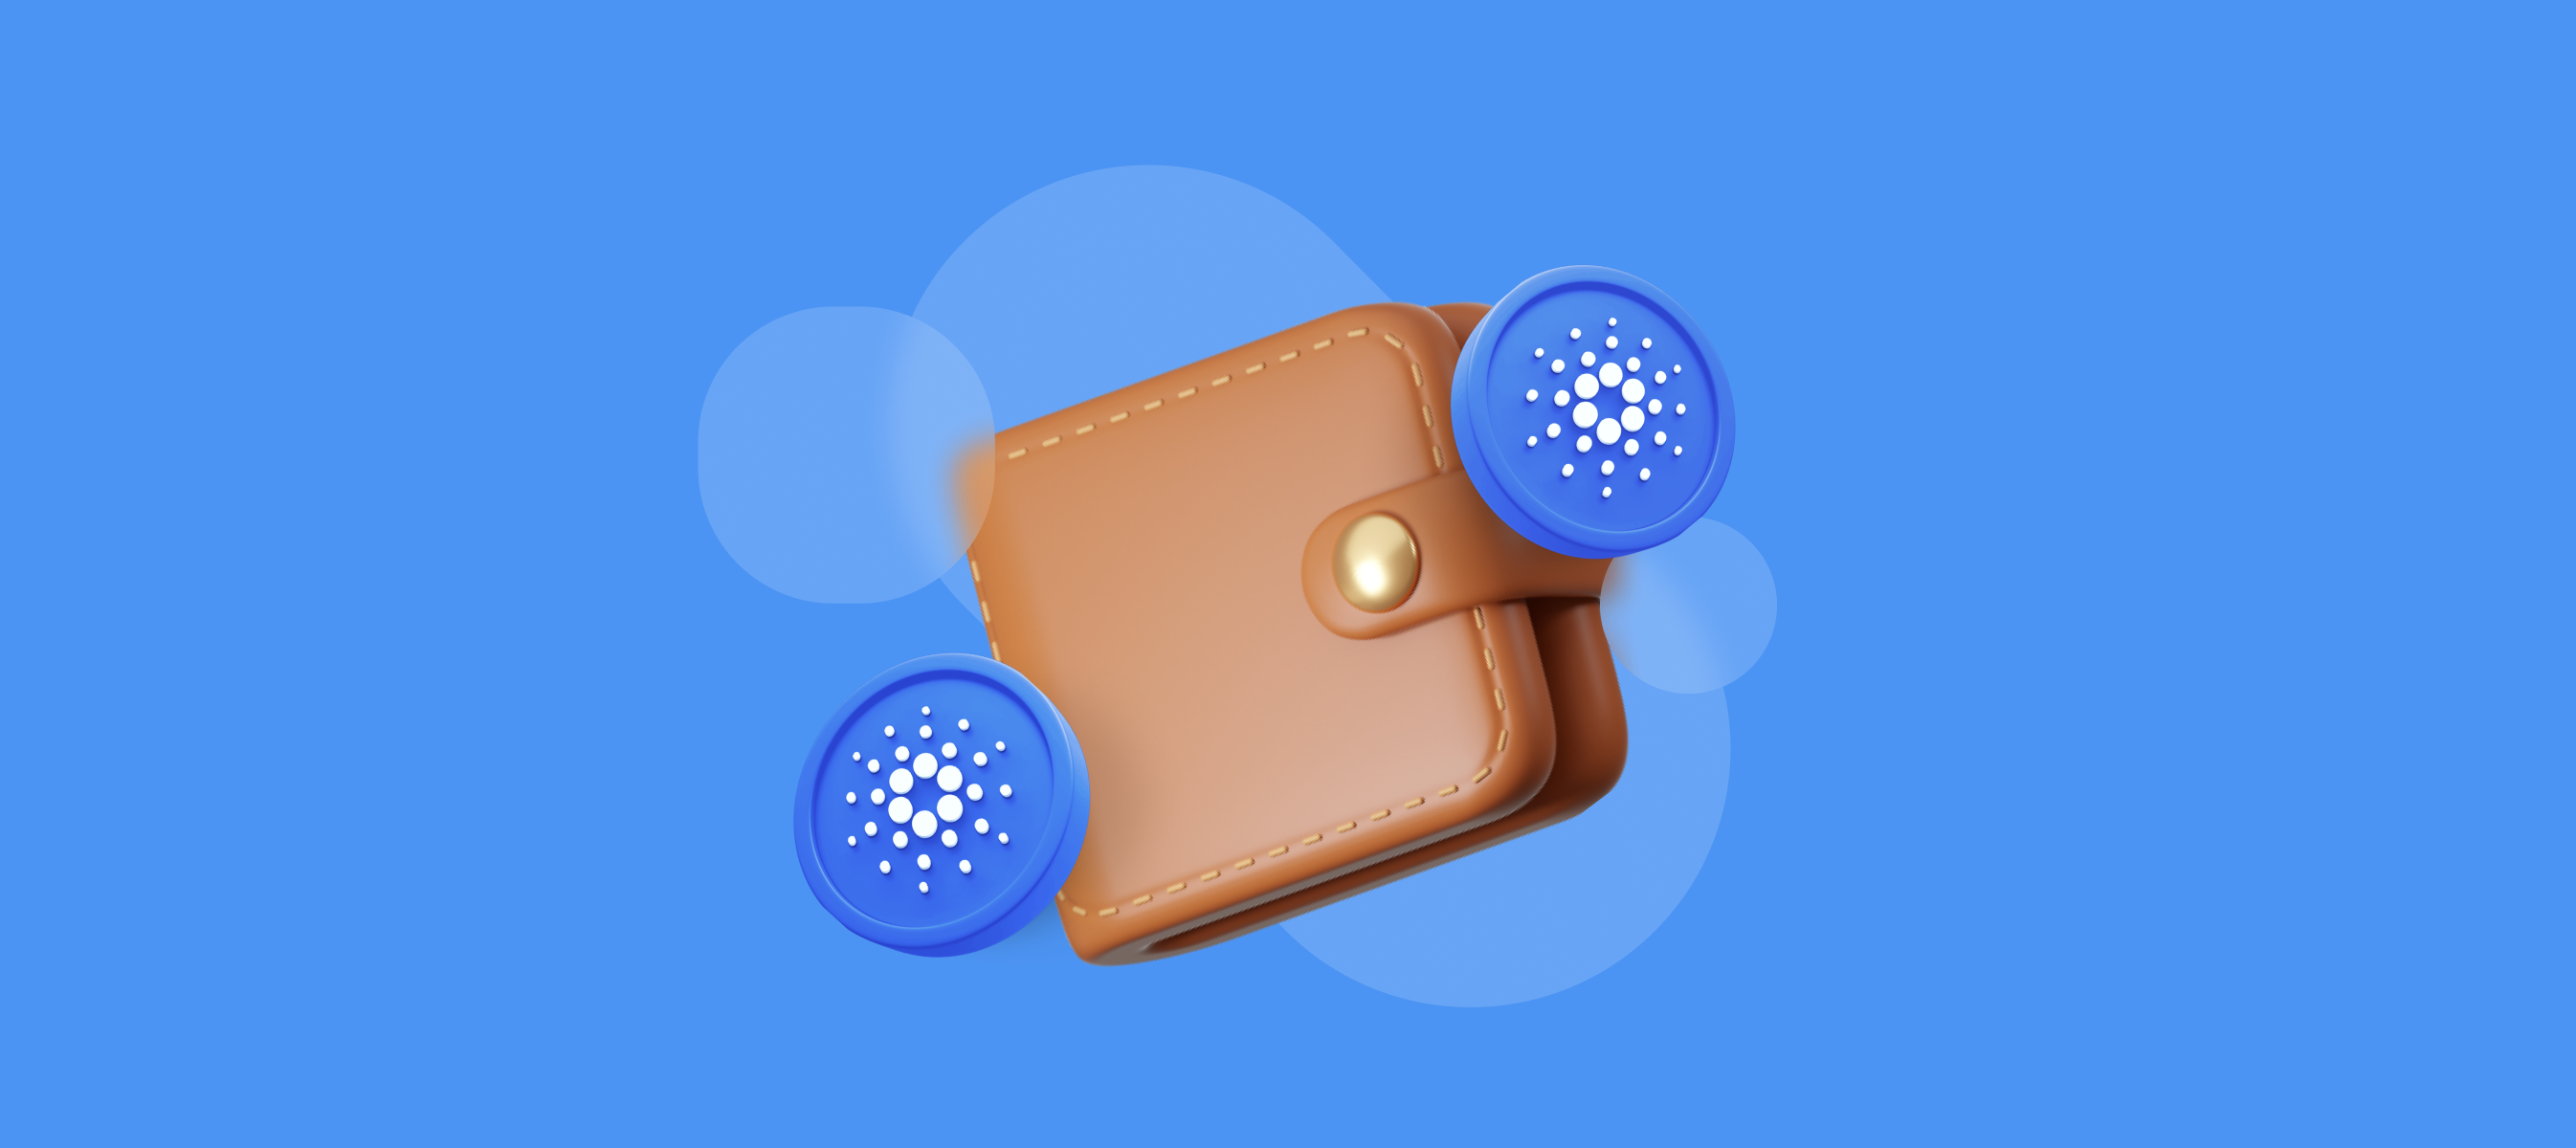 Cardano Wallet Choosing Guide - How to Find the Best and Most Secure ADA Wallet App